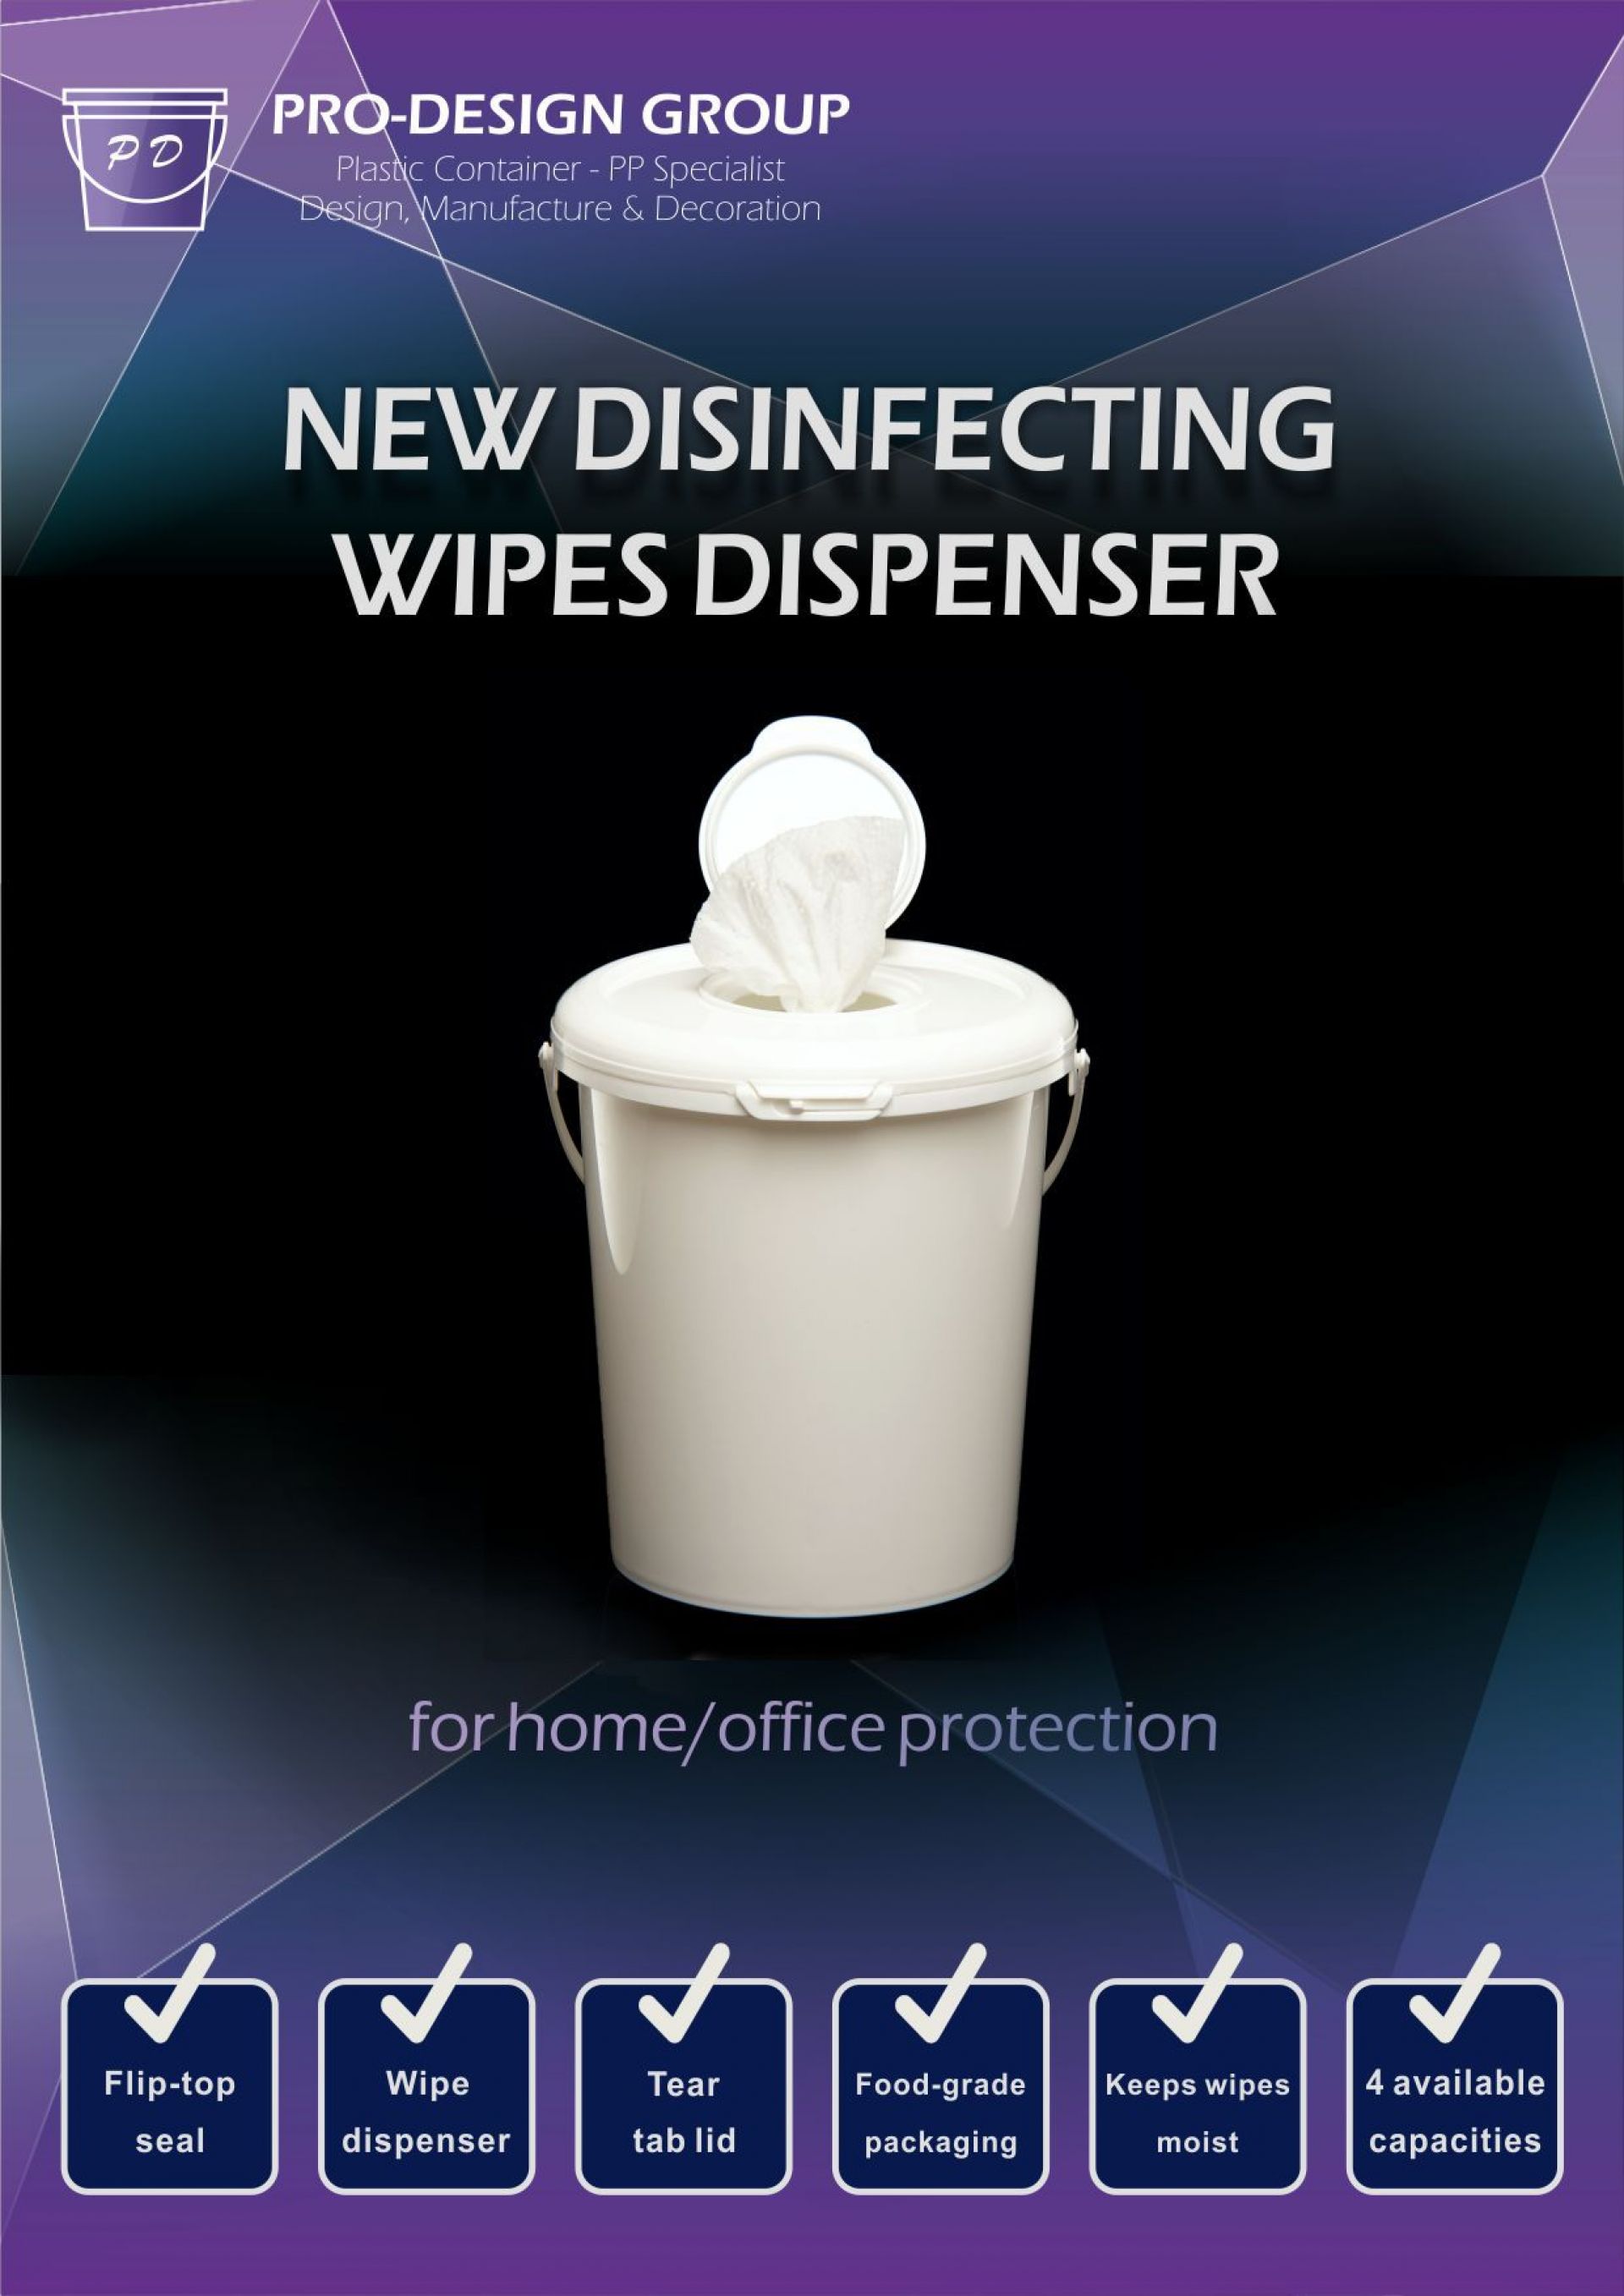 NEW DISINFECTING WIPES DISPENSER